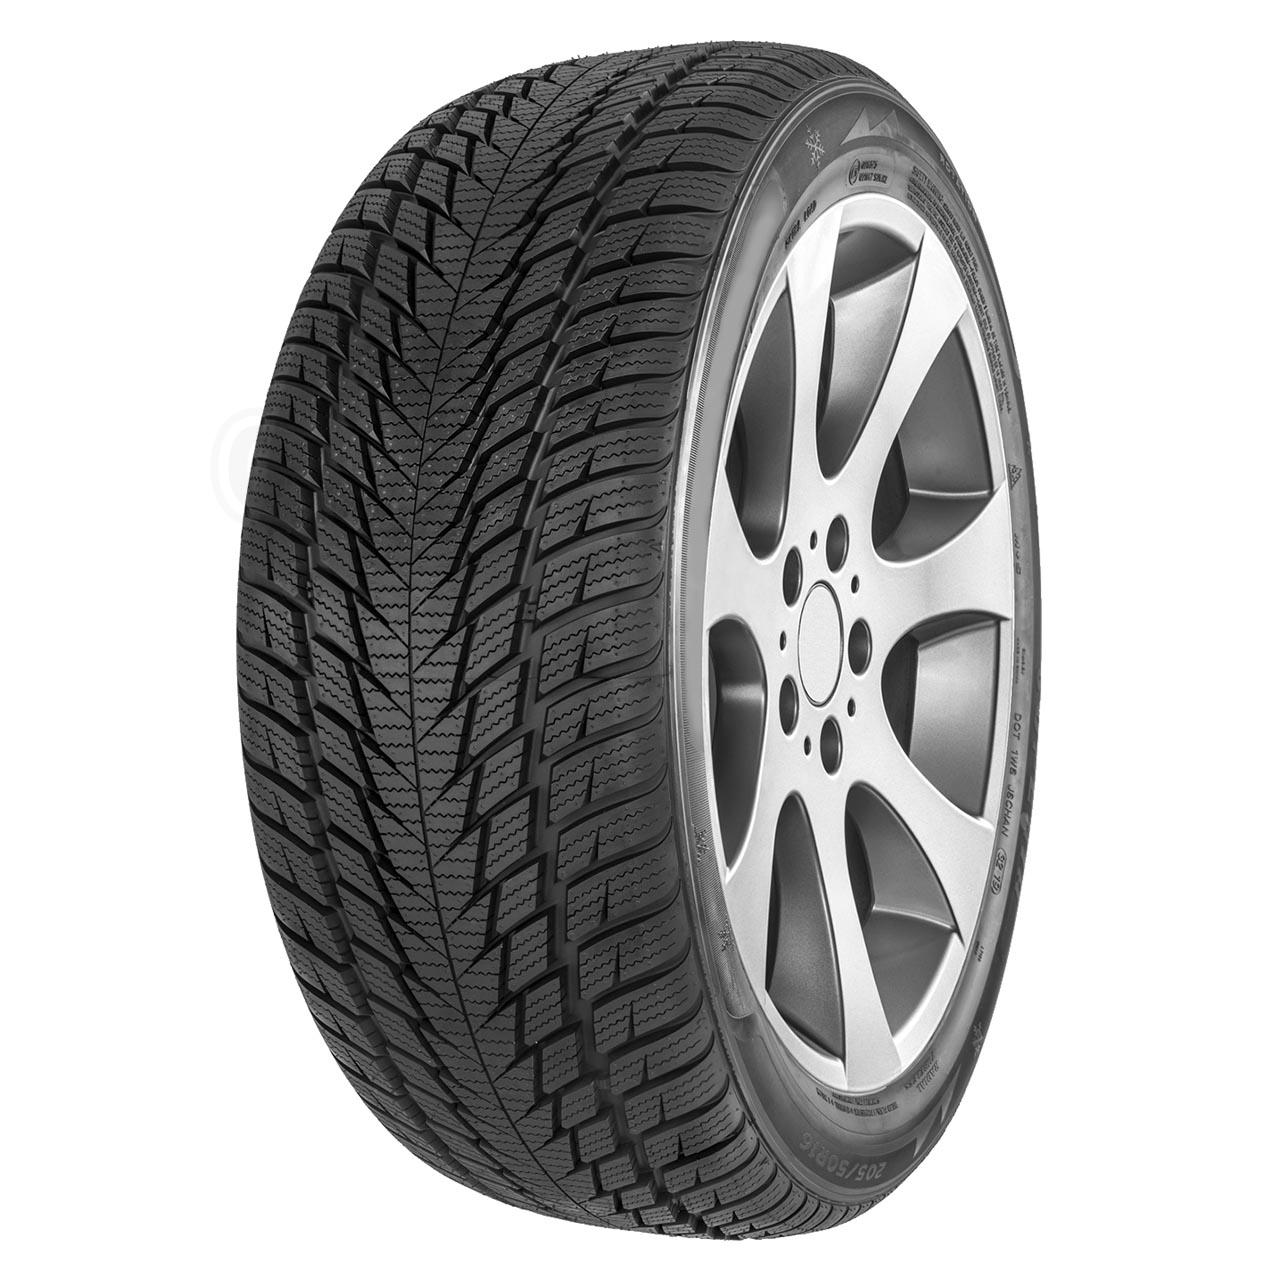 Fortuna Gowin UHP 2 205/45R16 87H XL